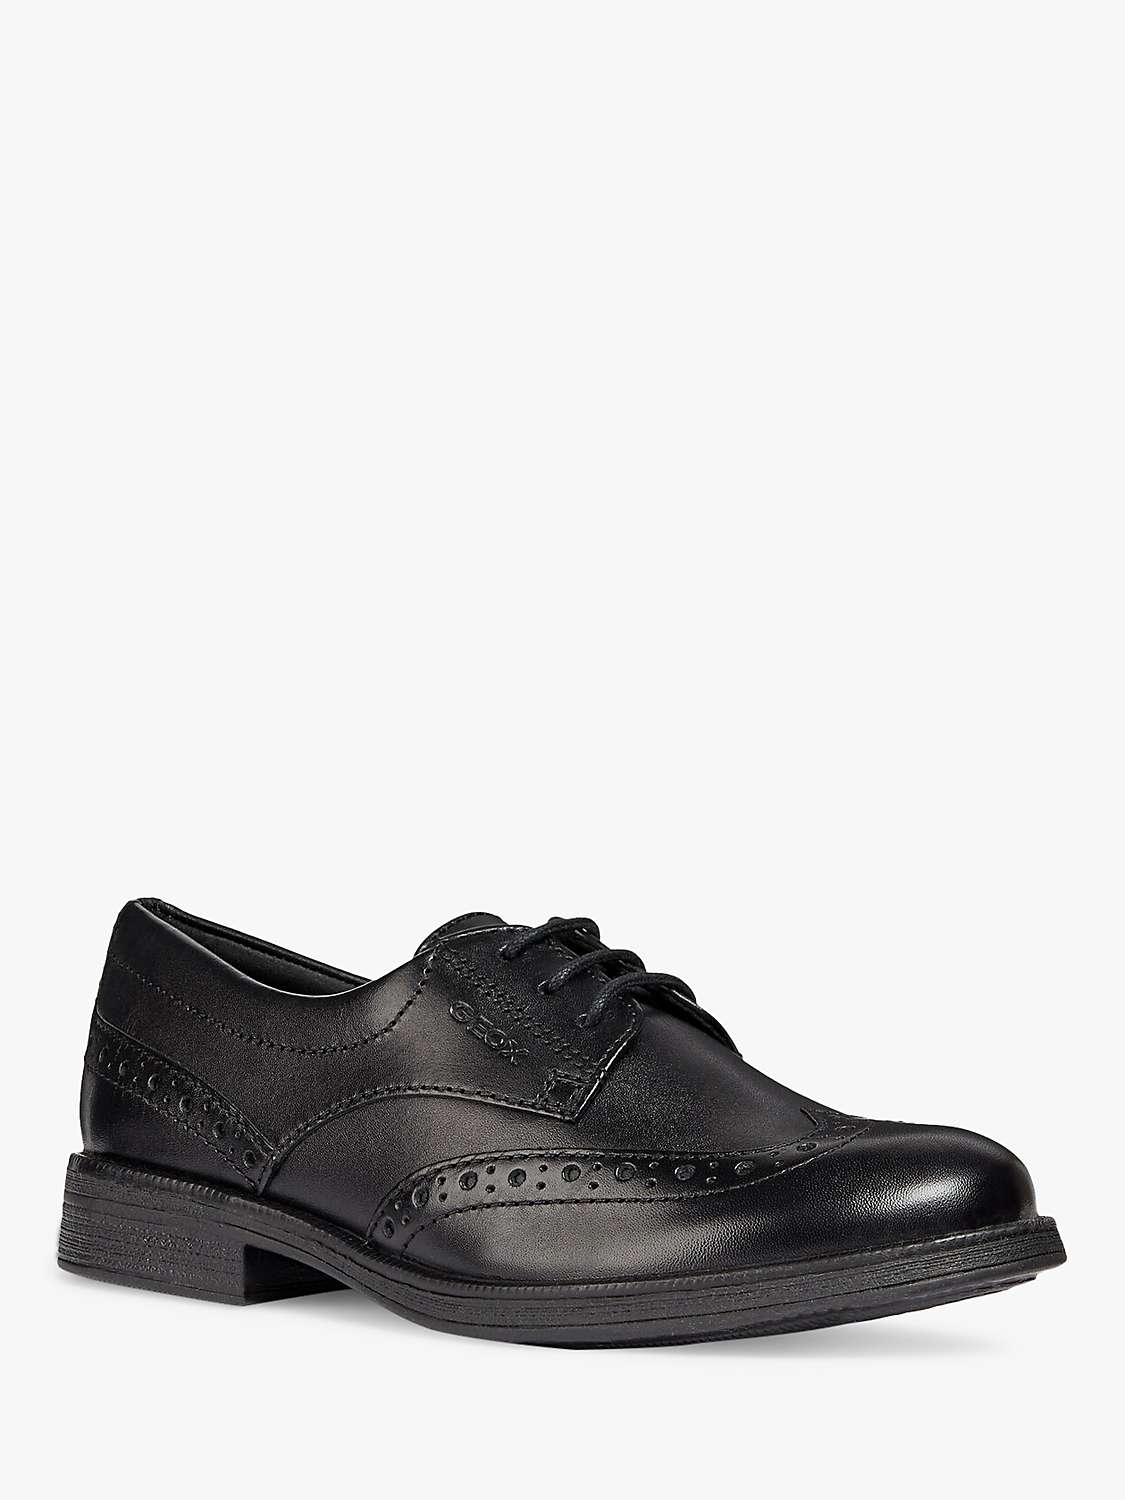 Buy Geox Kids' Agata Lace-Up Brogue Shoes, Black Online at johnlewis.com